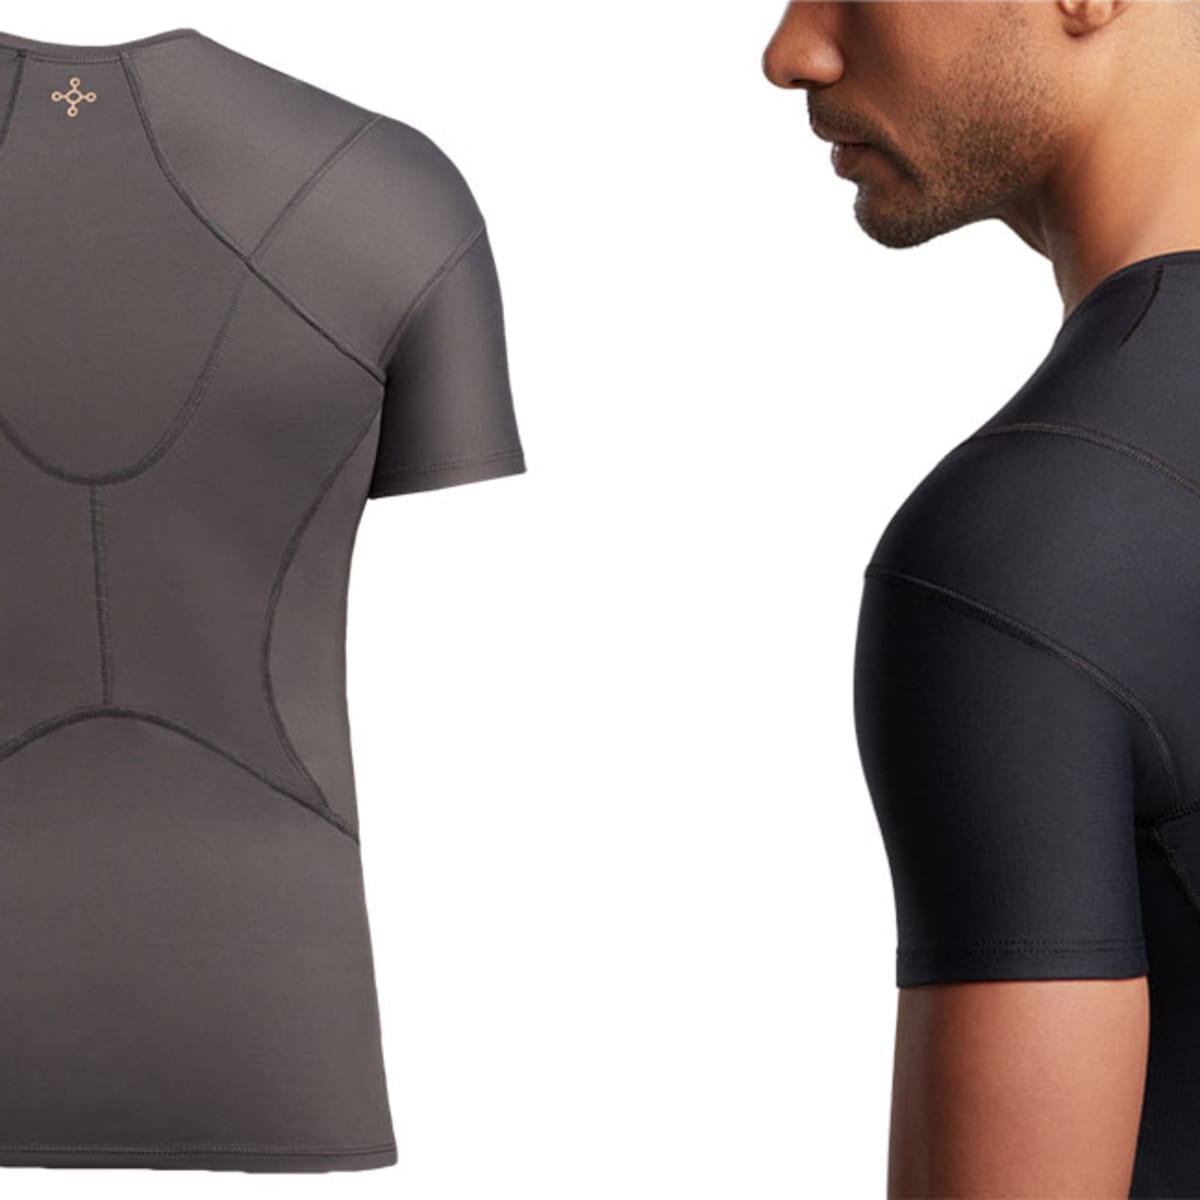 Keep Your Upper Body Supported With This Shoulder Support Shirt From Tommie  Copper - Men's Journal